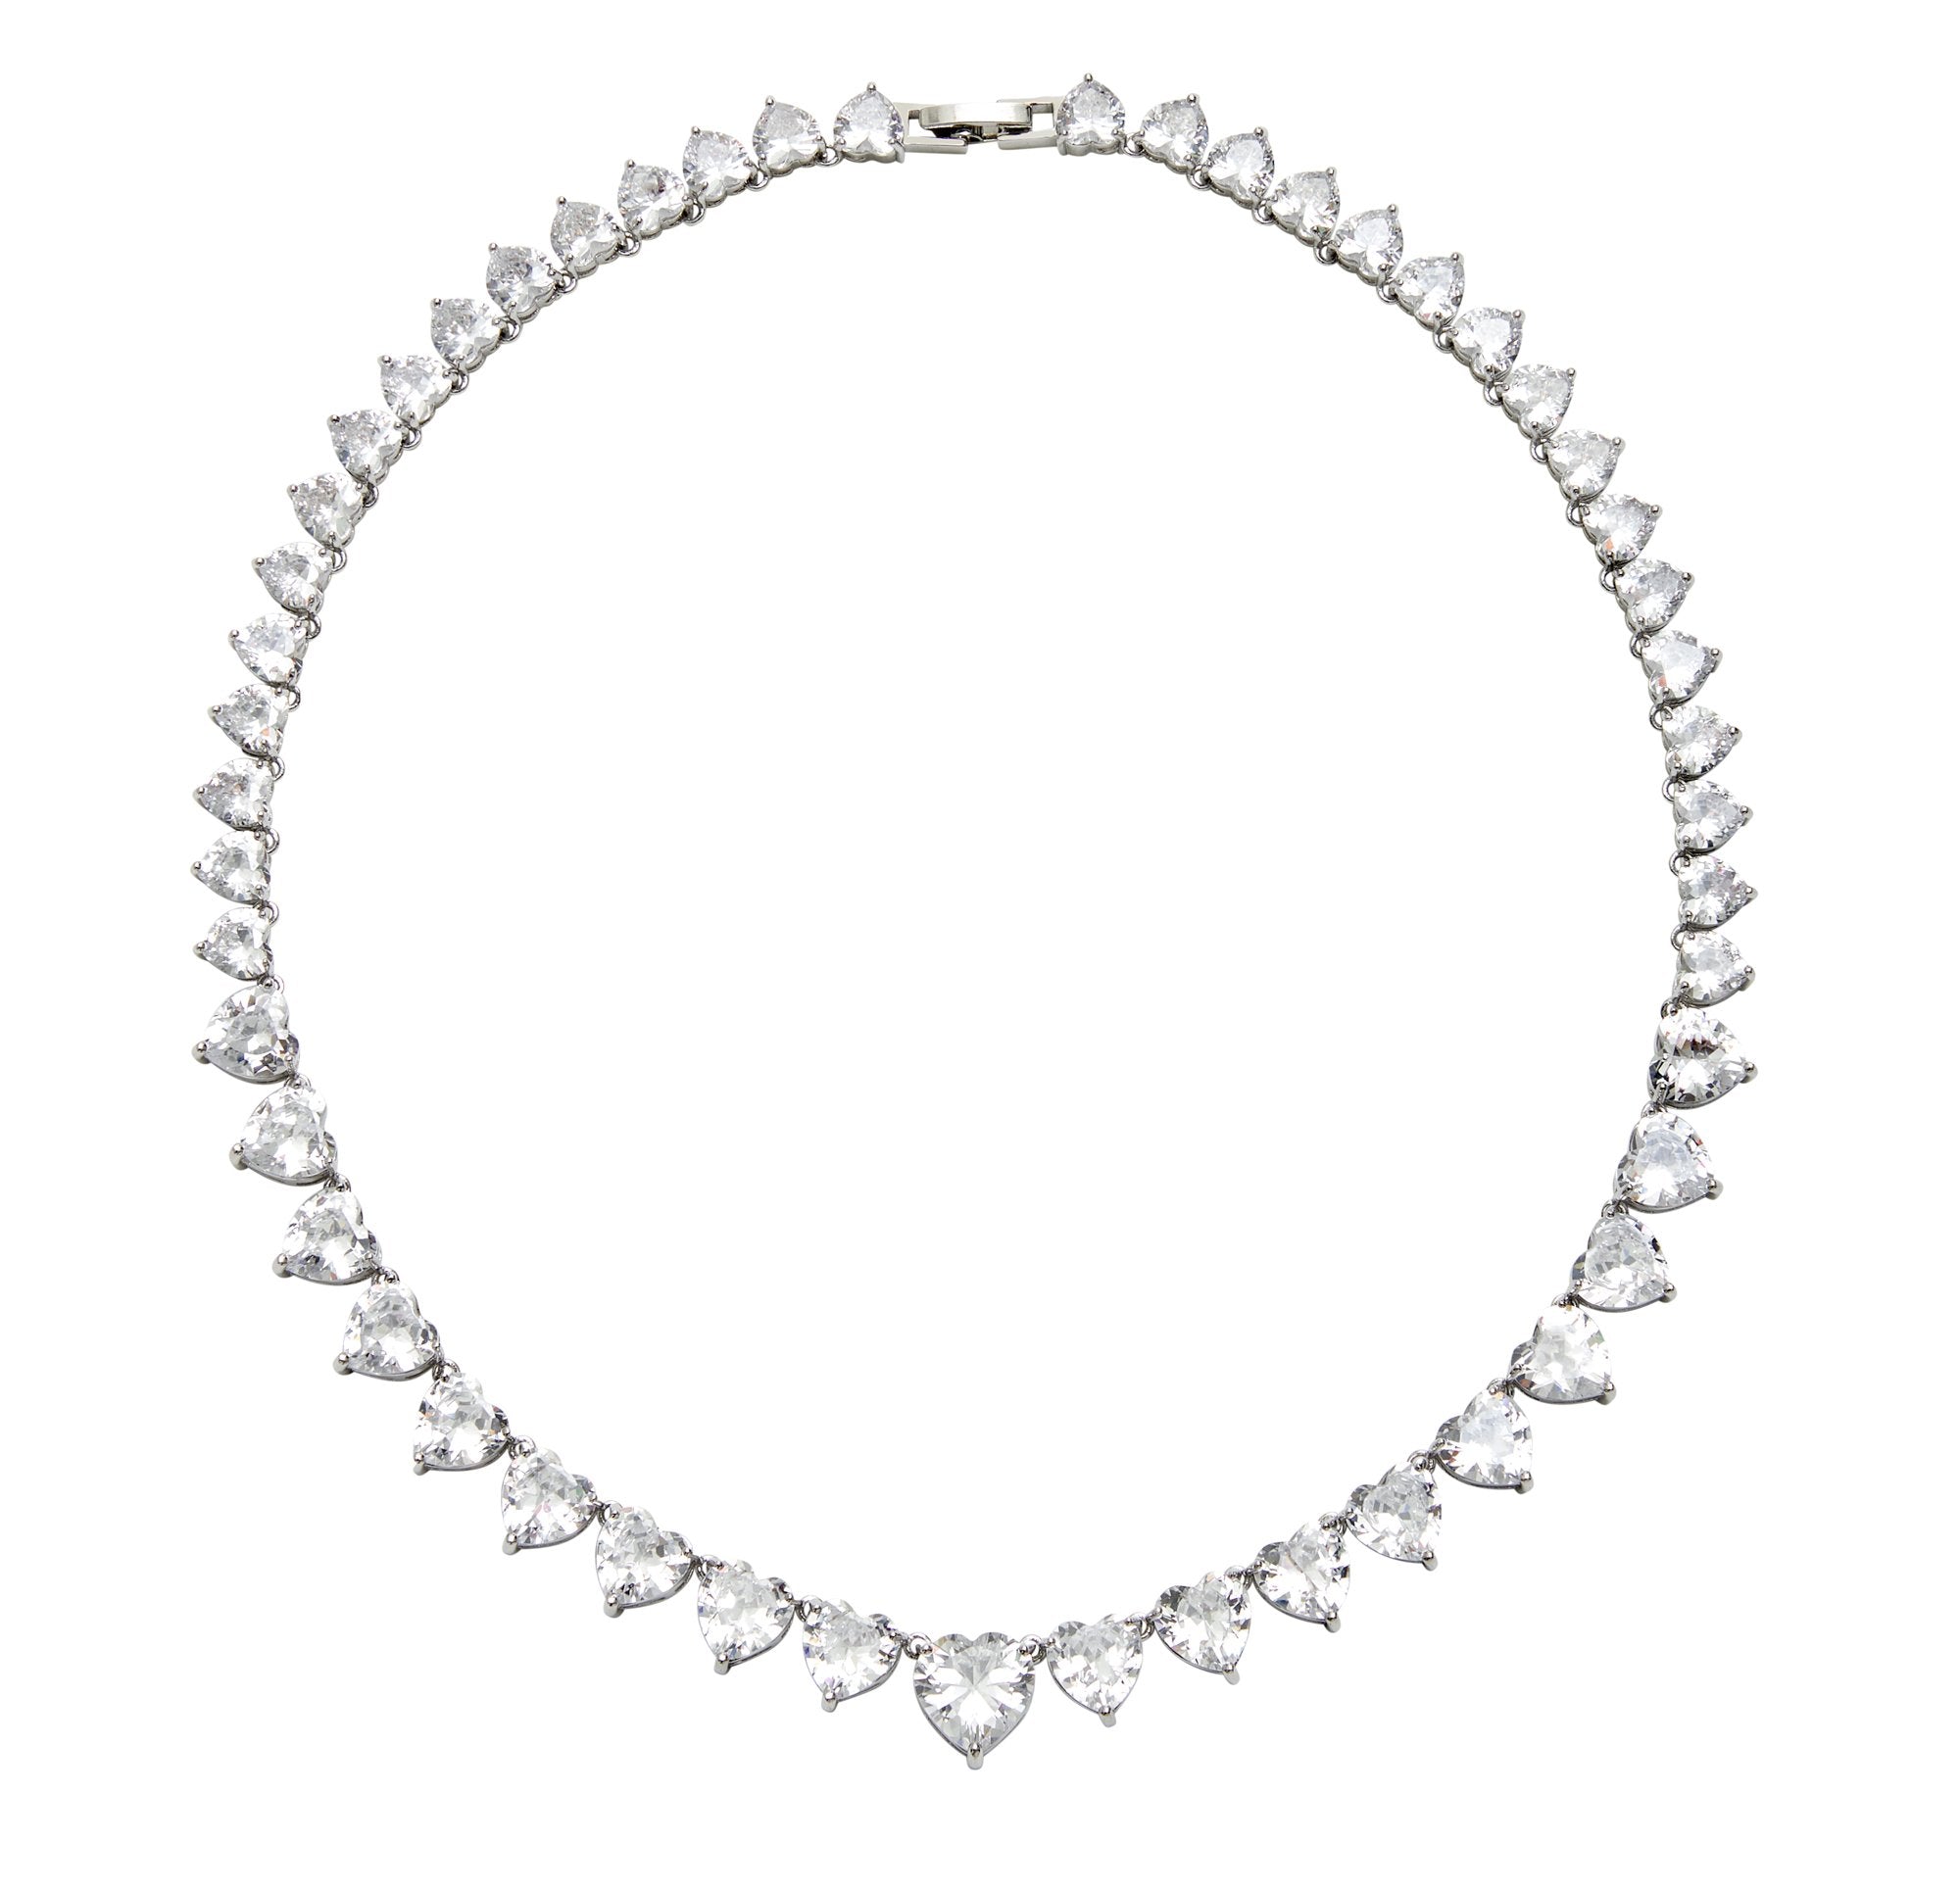 The FALLON Heart Rivière Collar Necklace has been worn by celebrities like Kylie Jenner, and Chriselle Lim.